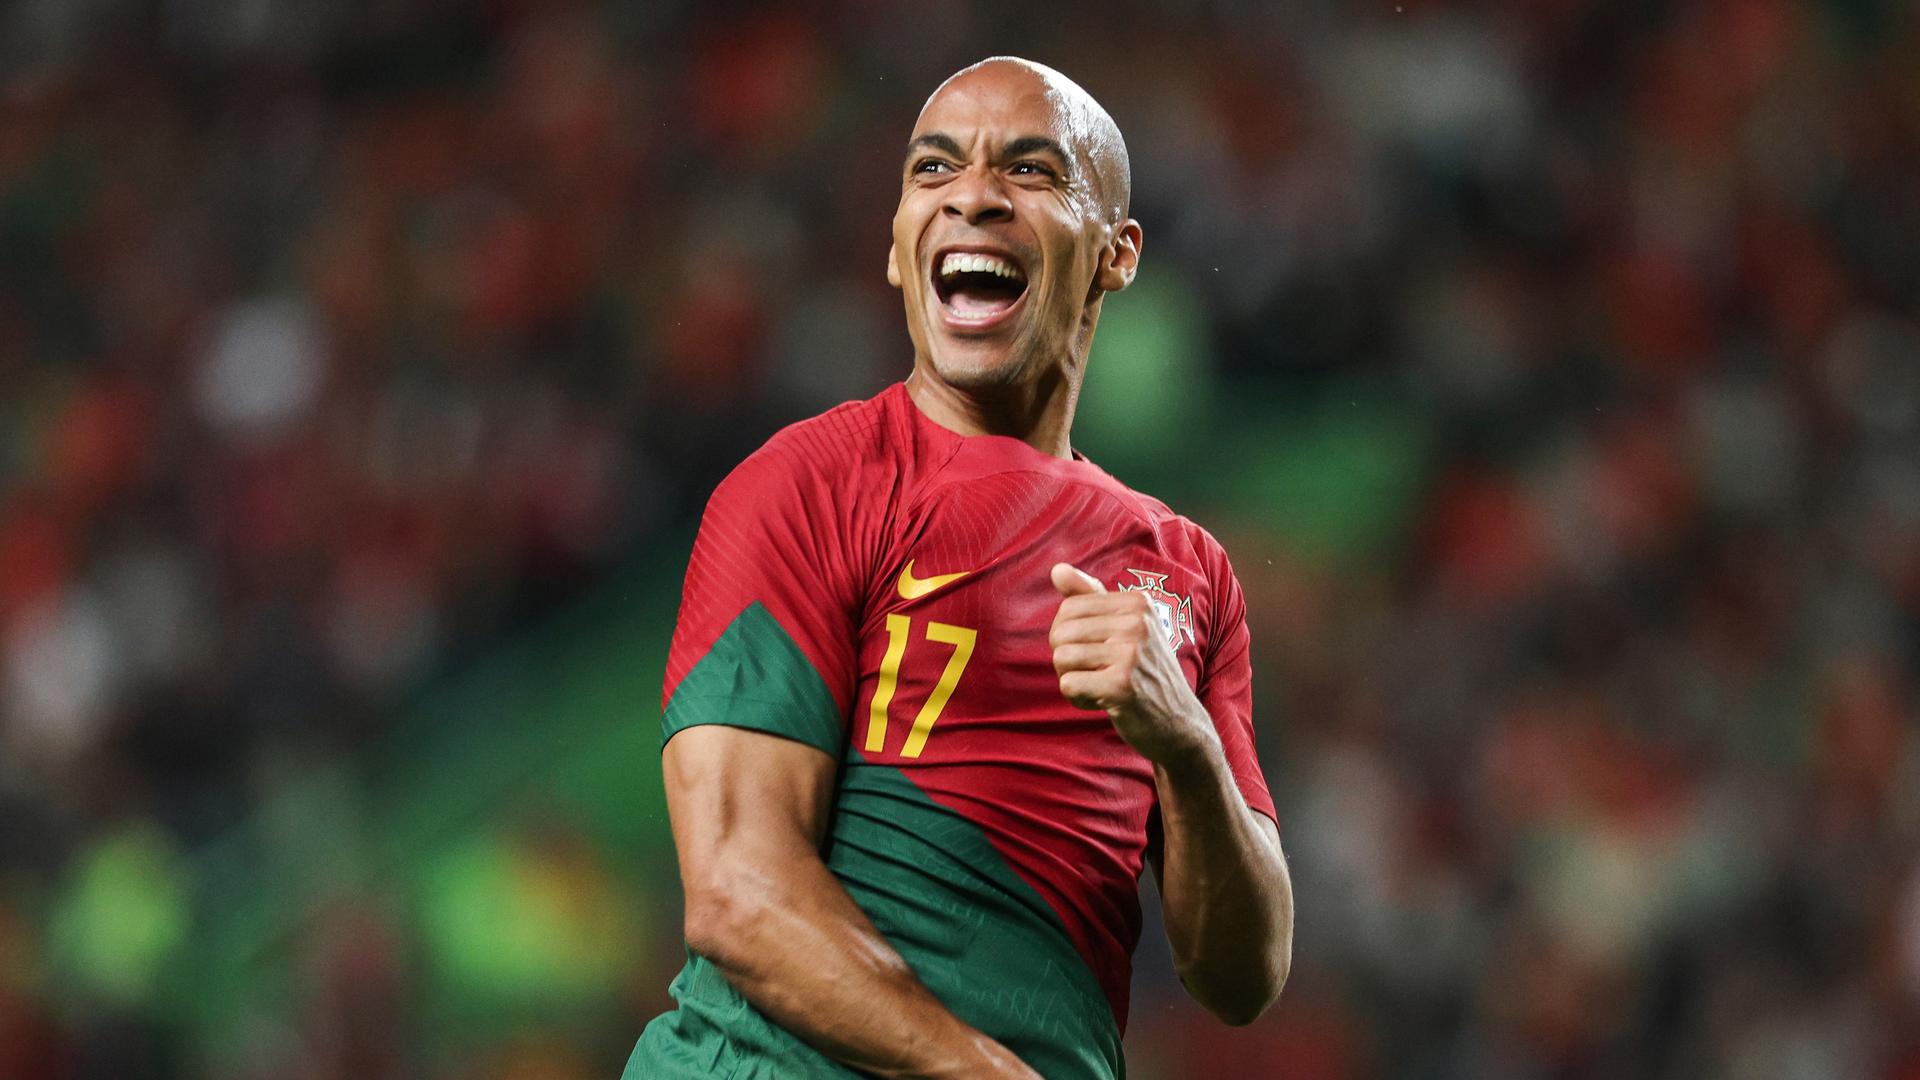 Portugal player Joao Mario celebrates after scoring a goal against Nigeria during the international friendly soccer match at Alavalada Stadium, in Lisbon, Portugal, 17 November 2022. Portugal is preparing for the FIFA World Cup 2022 group H in Qatar with their first match against Ghana on 24th November. MIGUEL A. LOPES/LUSA